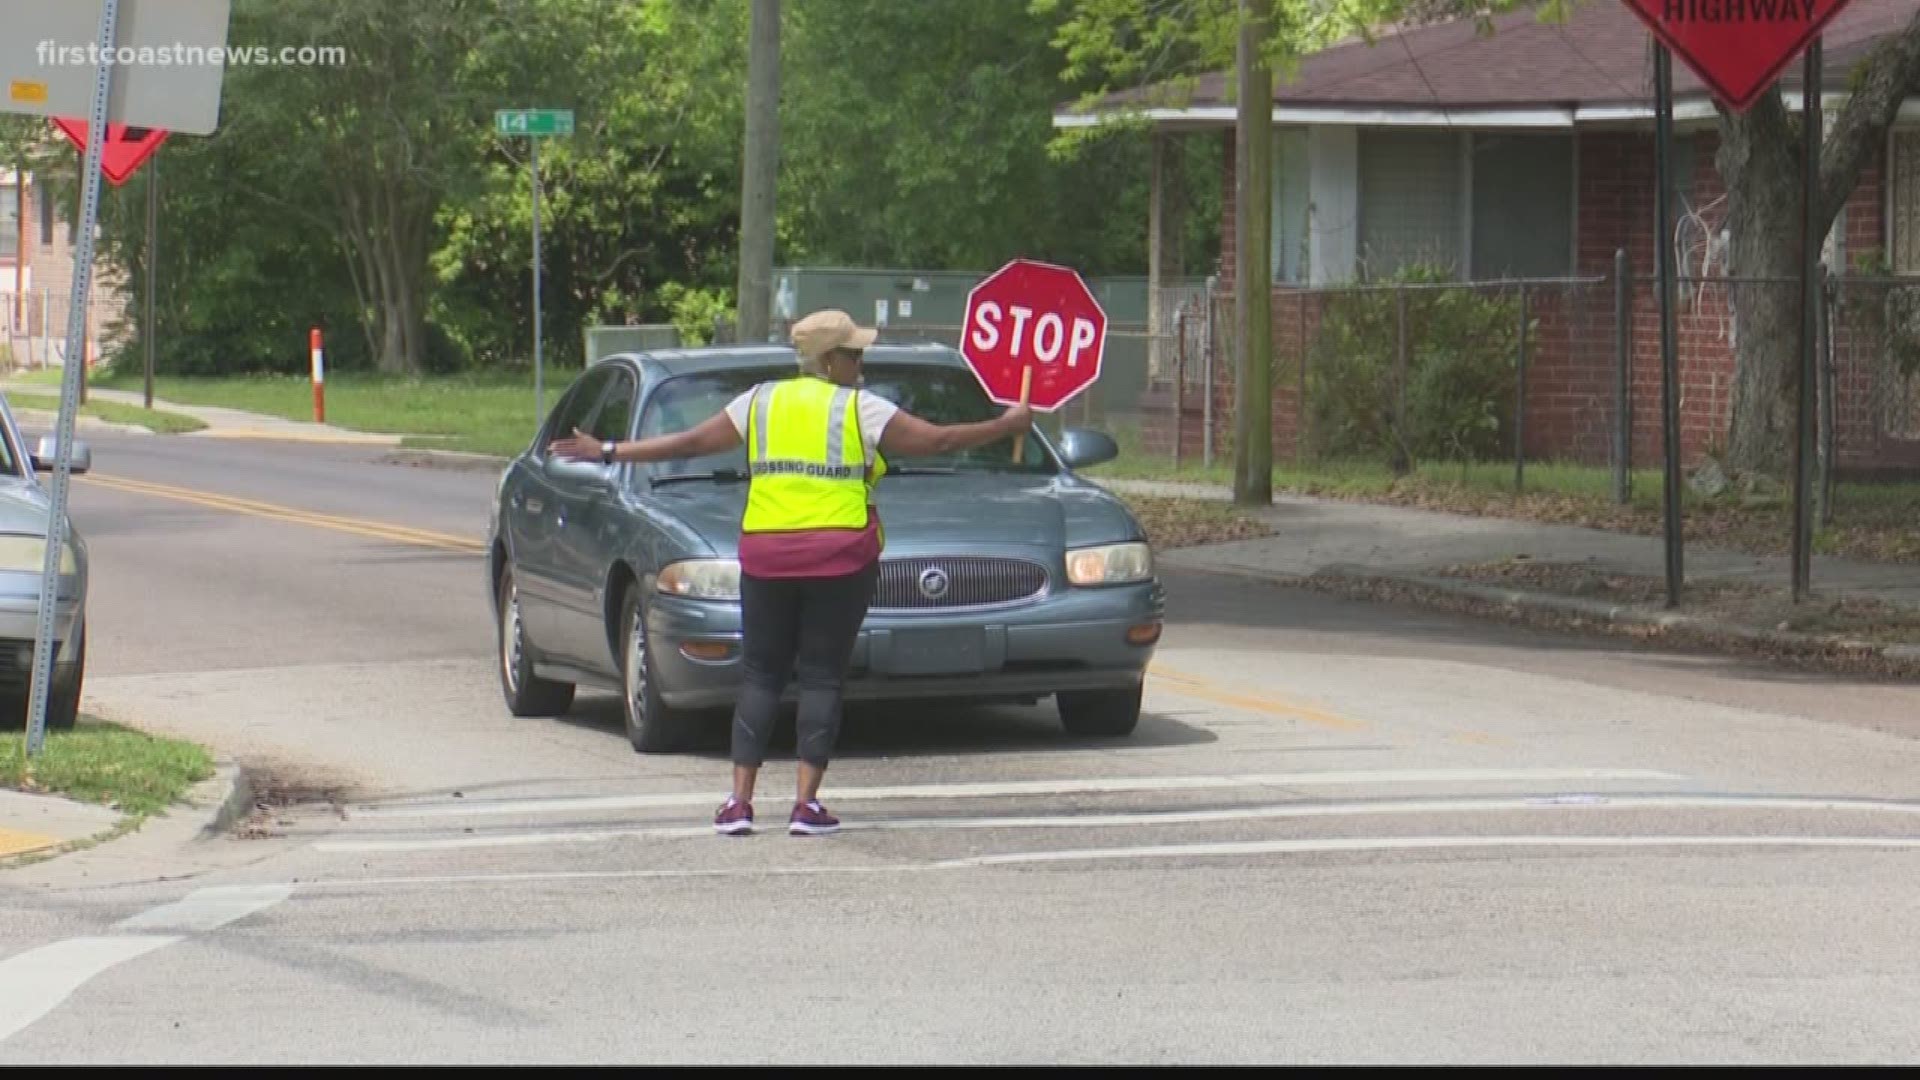 School crossing guards are many times overlooked, but carry a heavy weight in protecting children as they travel to and from school. Due to this, school districts are hoping to fill open vacancies.